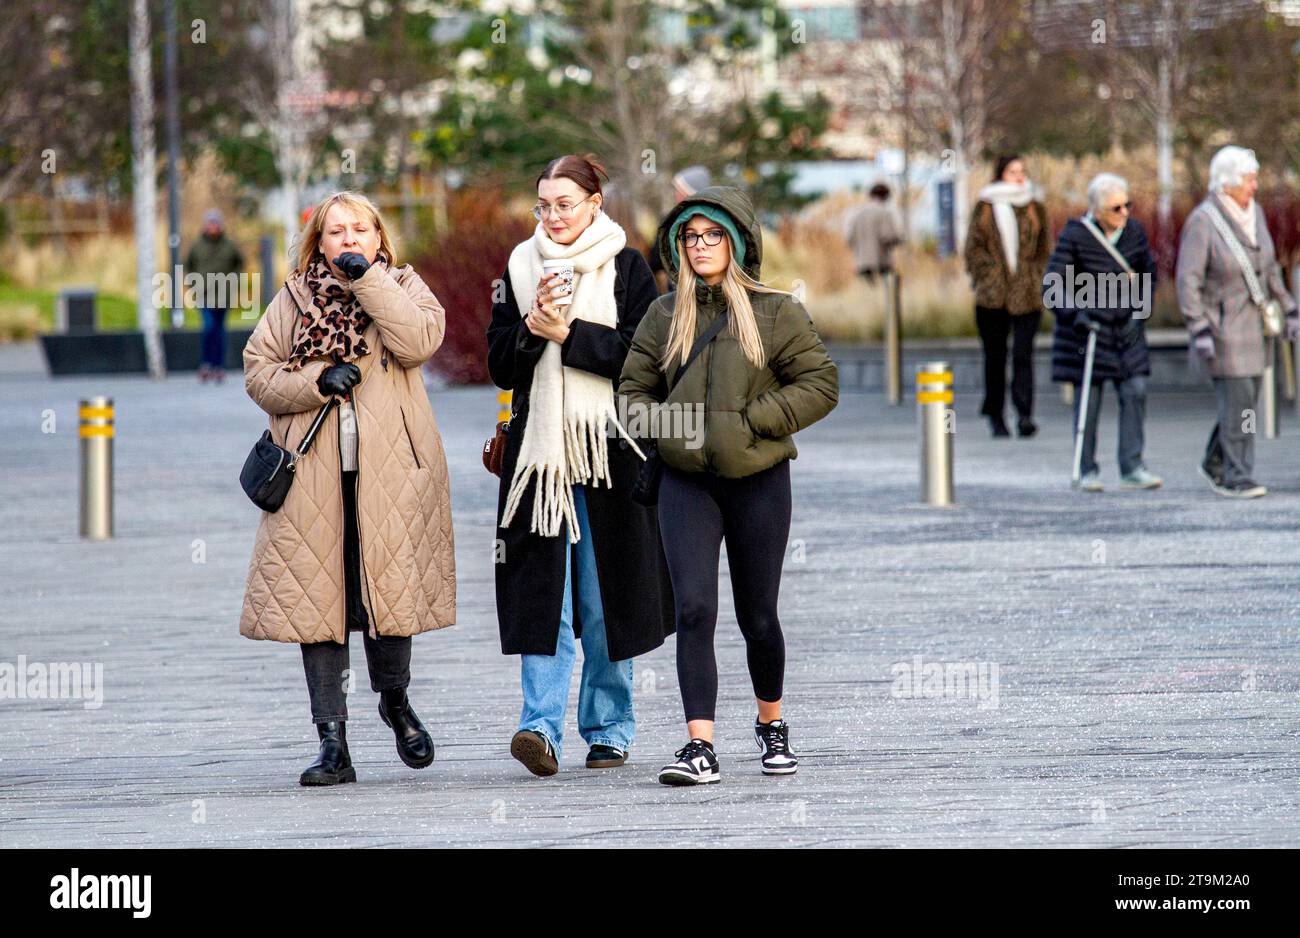 Dundee, Tayside, Scotland, UK. 26th Nov, 2023. UK Weather: Tayside is experiencing bitterly cold weather with temperatures reached 1°C. Tourists and locals are braving the freezing cold winter weather to visit the V&A Design Museum along the Dundee Waterfront on a Sunday morning. Credit: Dundee Photographics/Alamy Live News Stock Photo